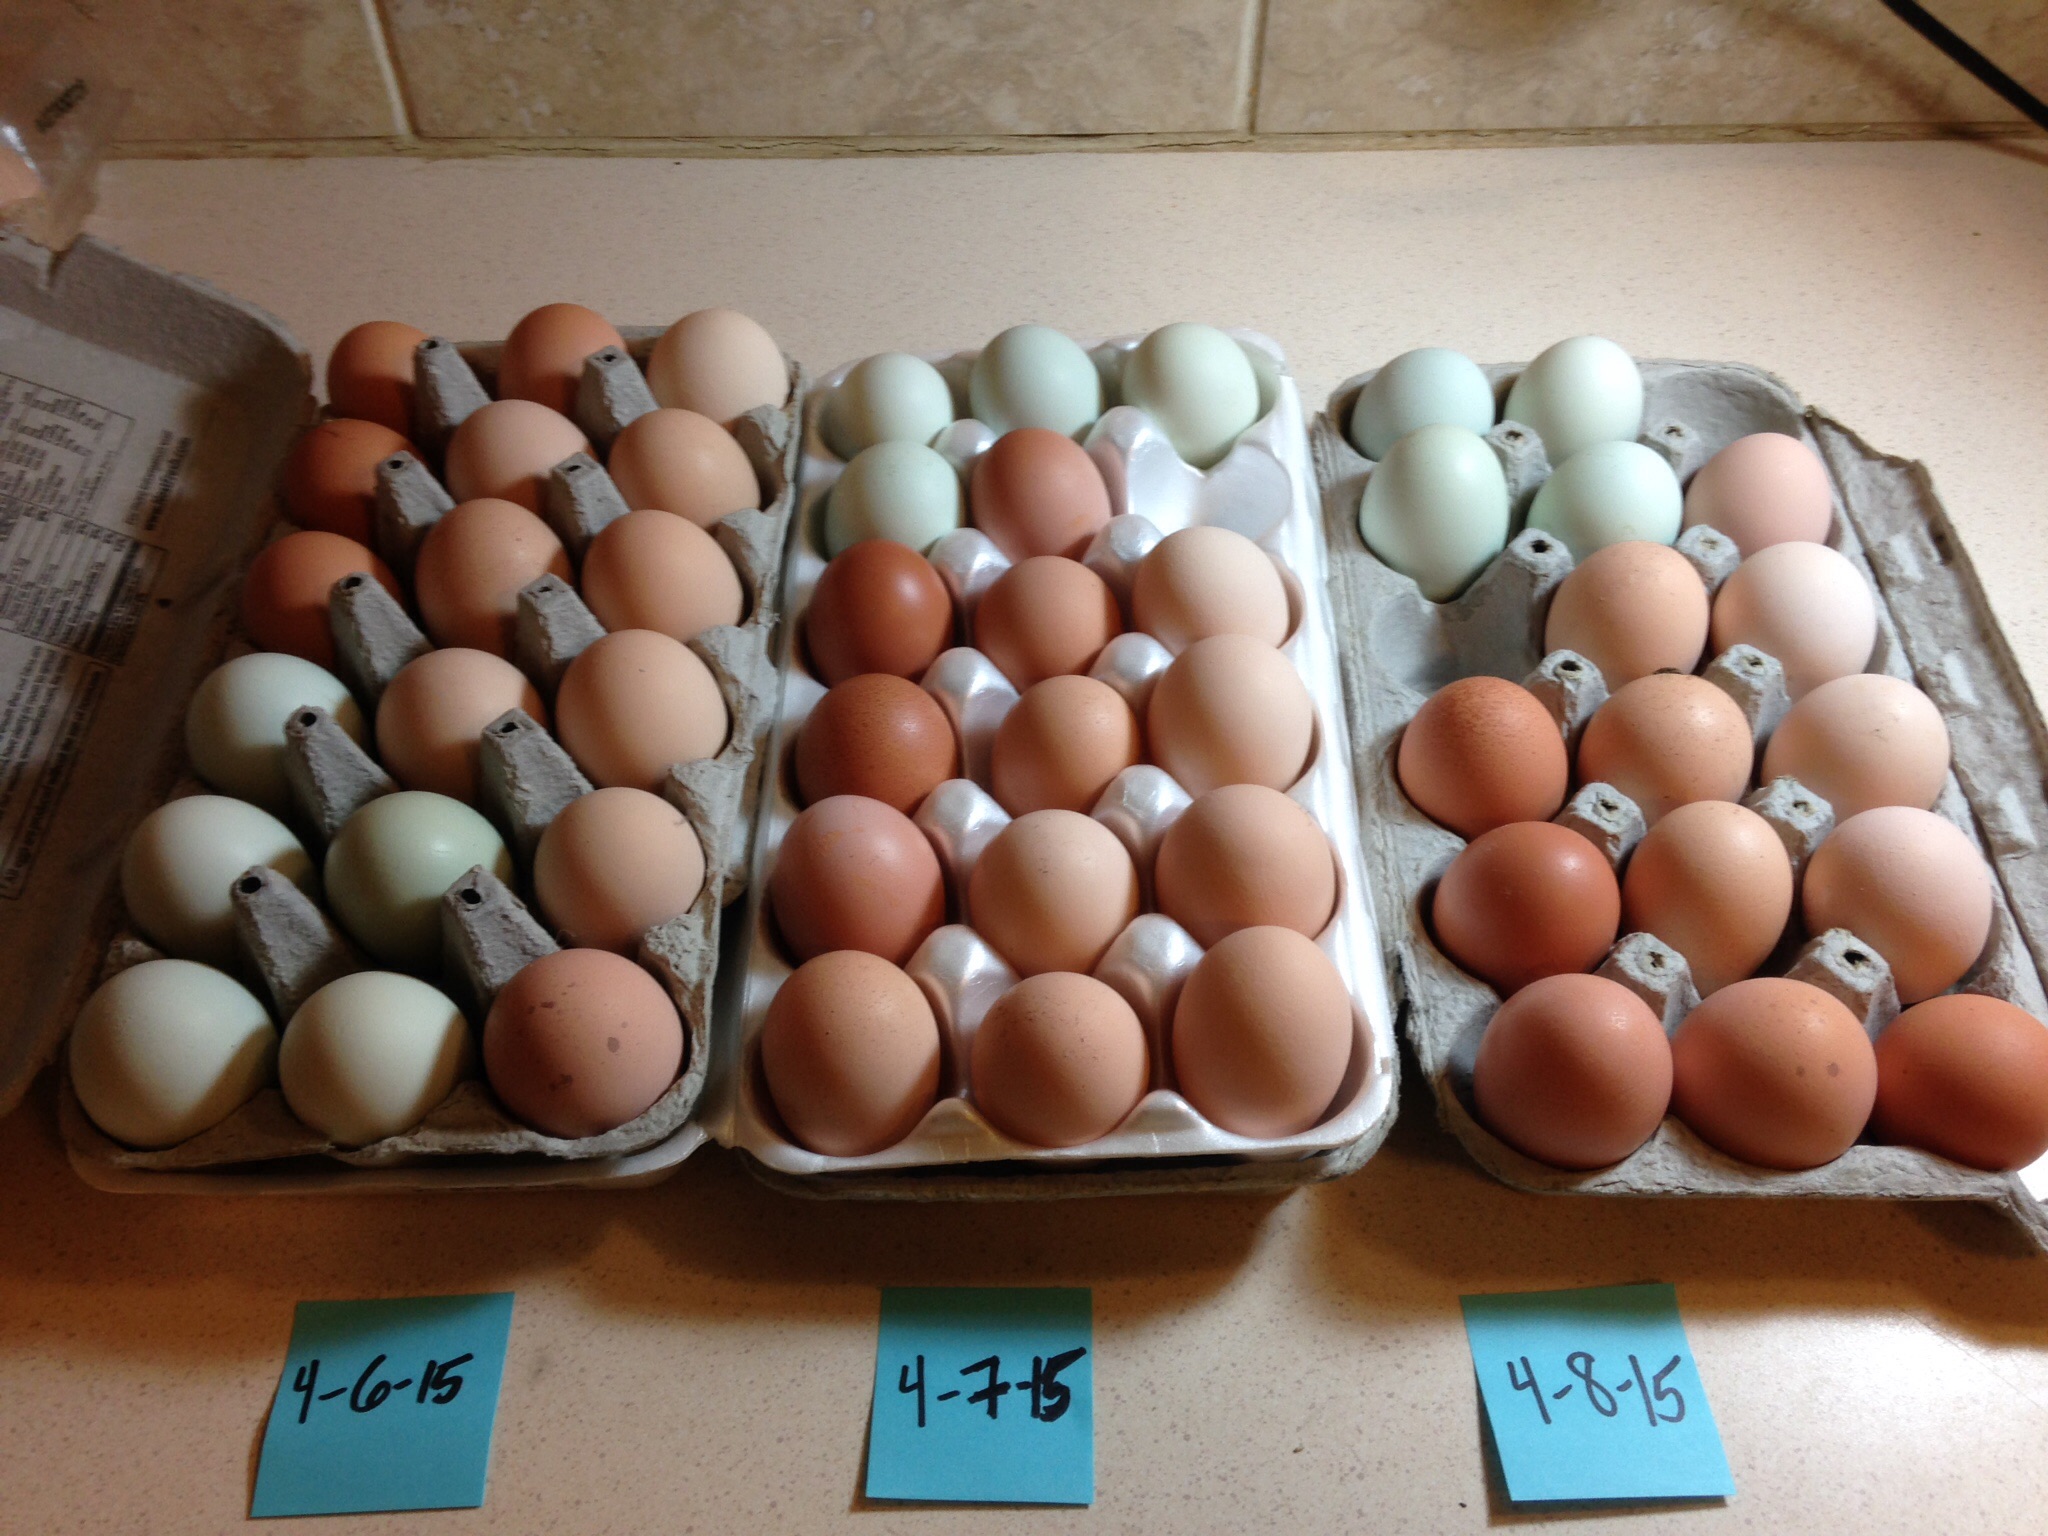 Eggs from the last three day.